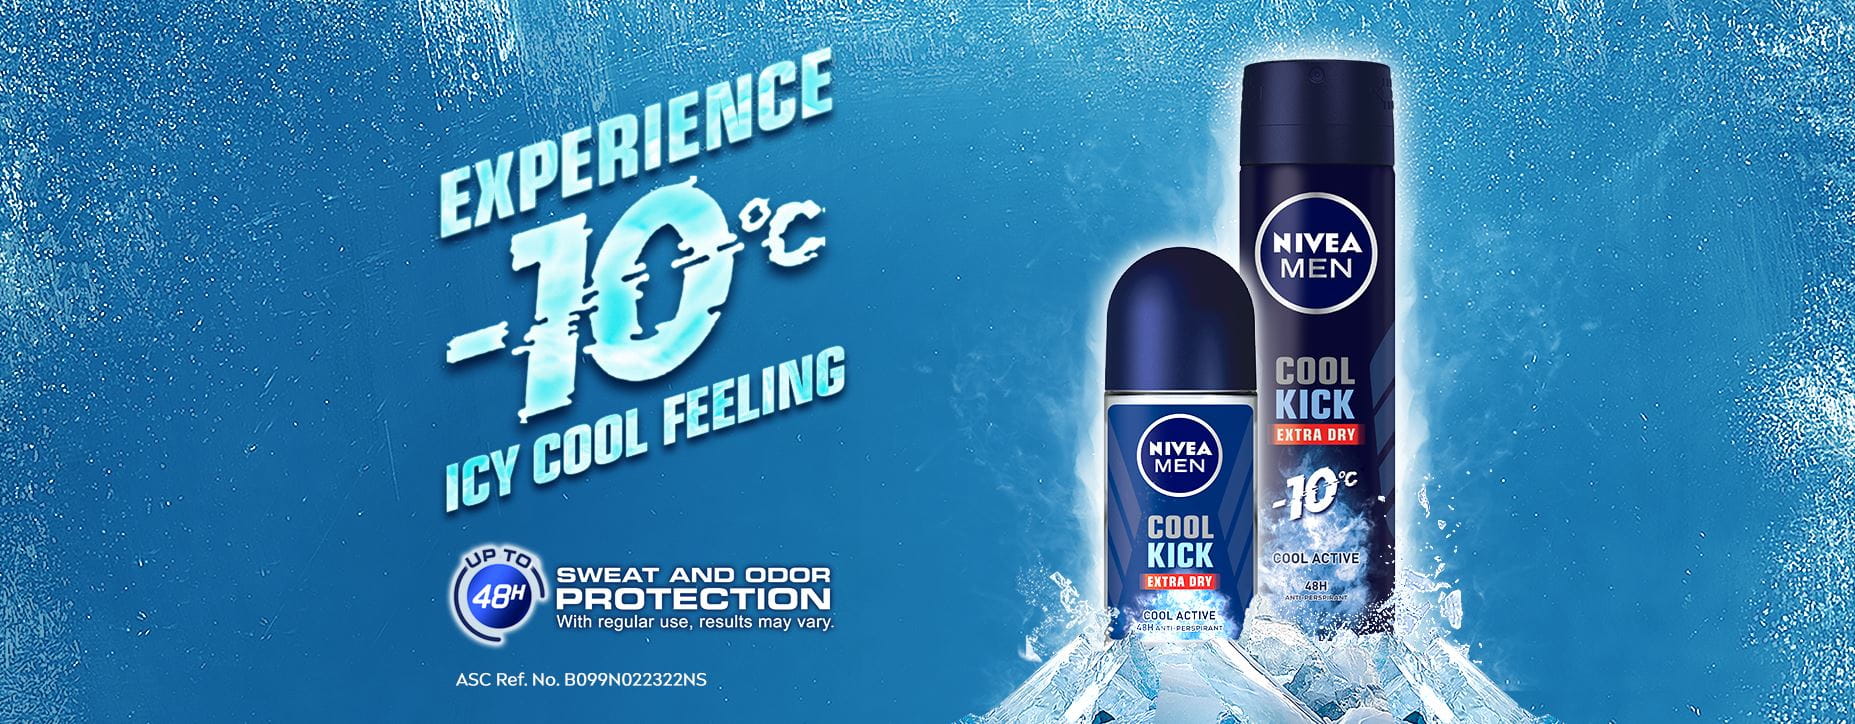 Get in the Cool Zone with NIVEA MEN Cool Kick